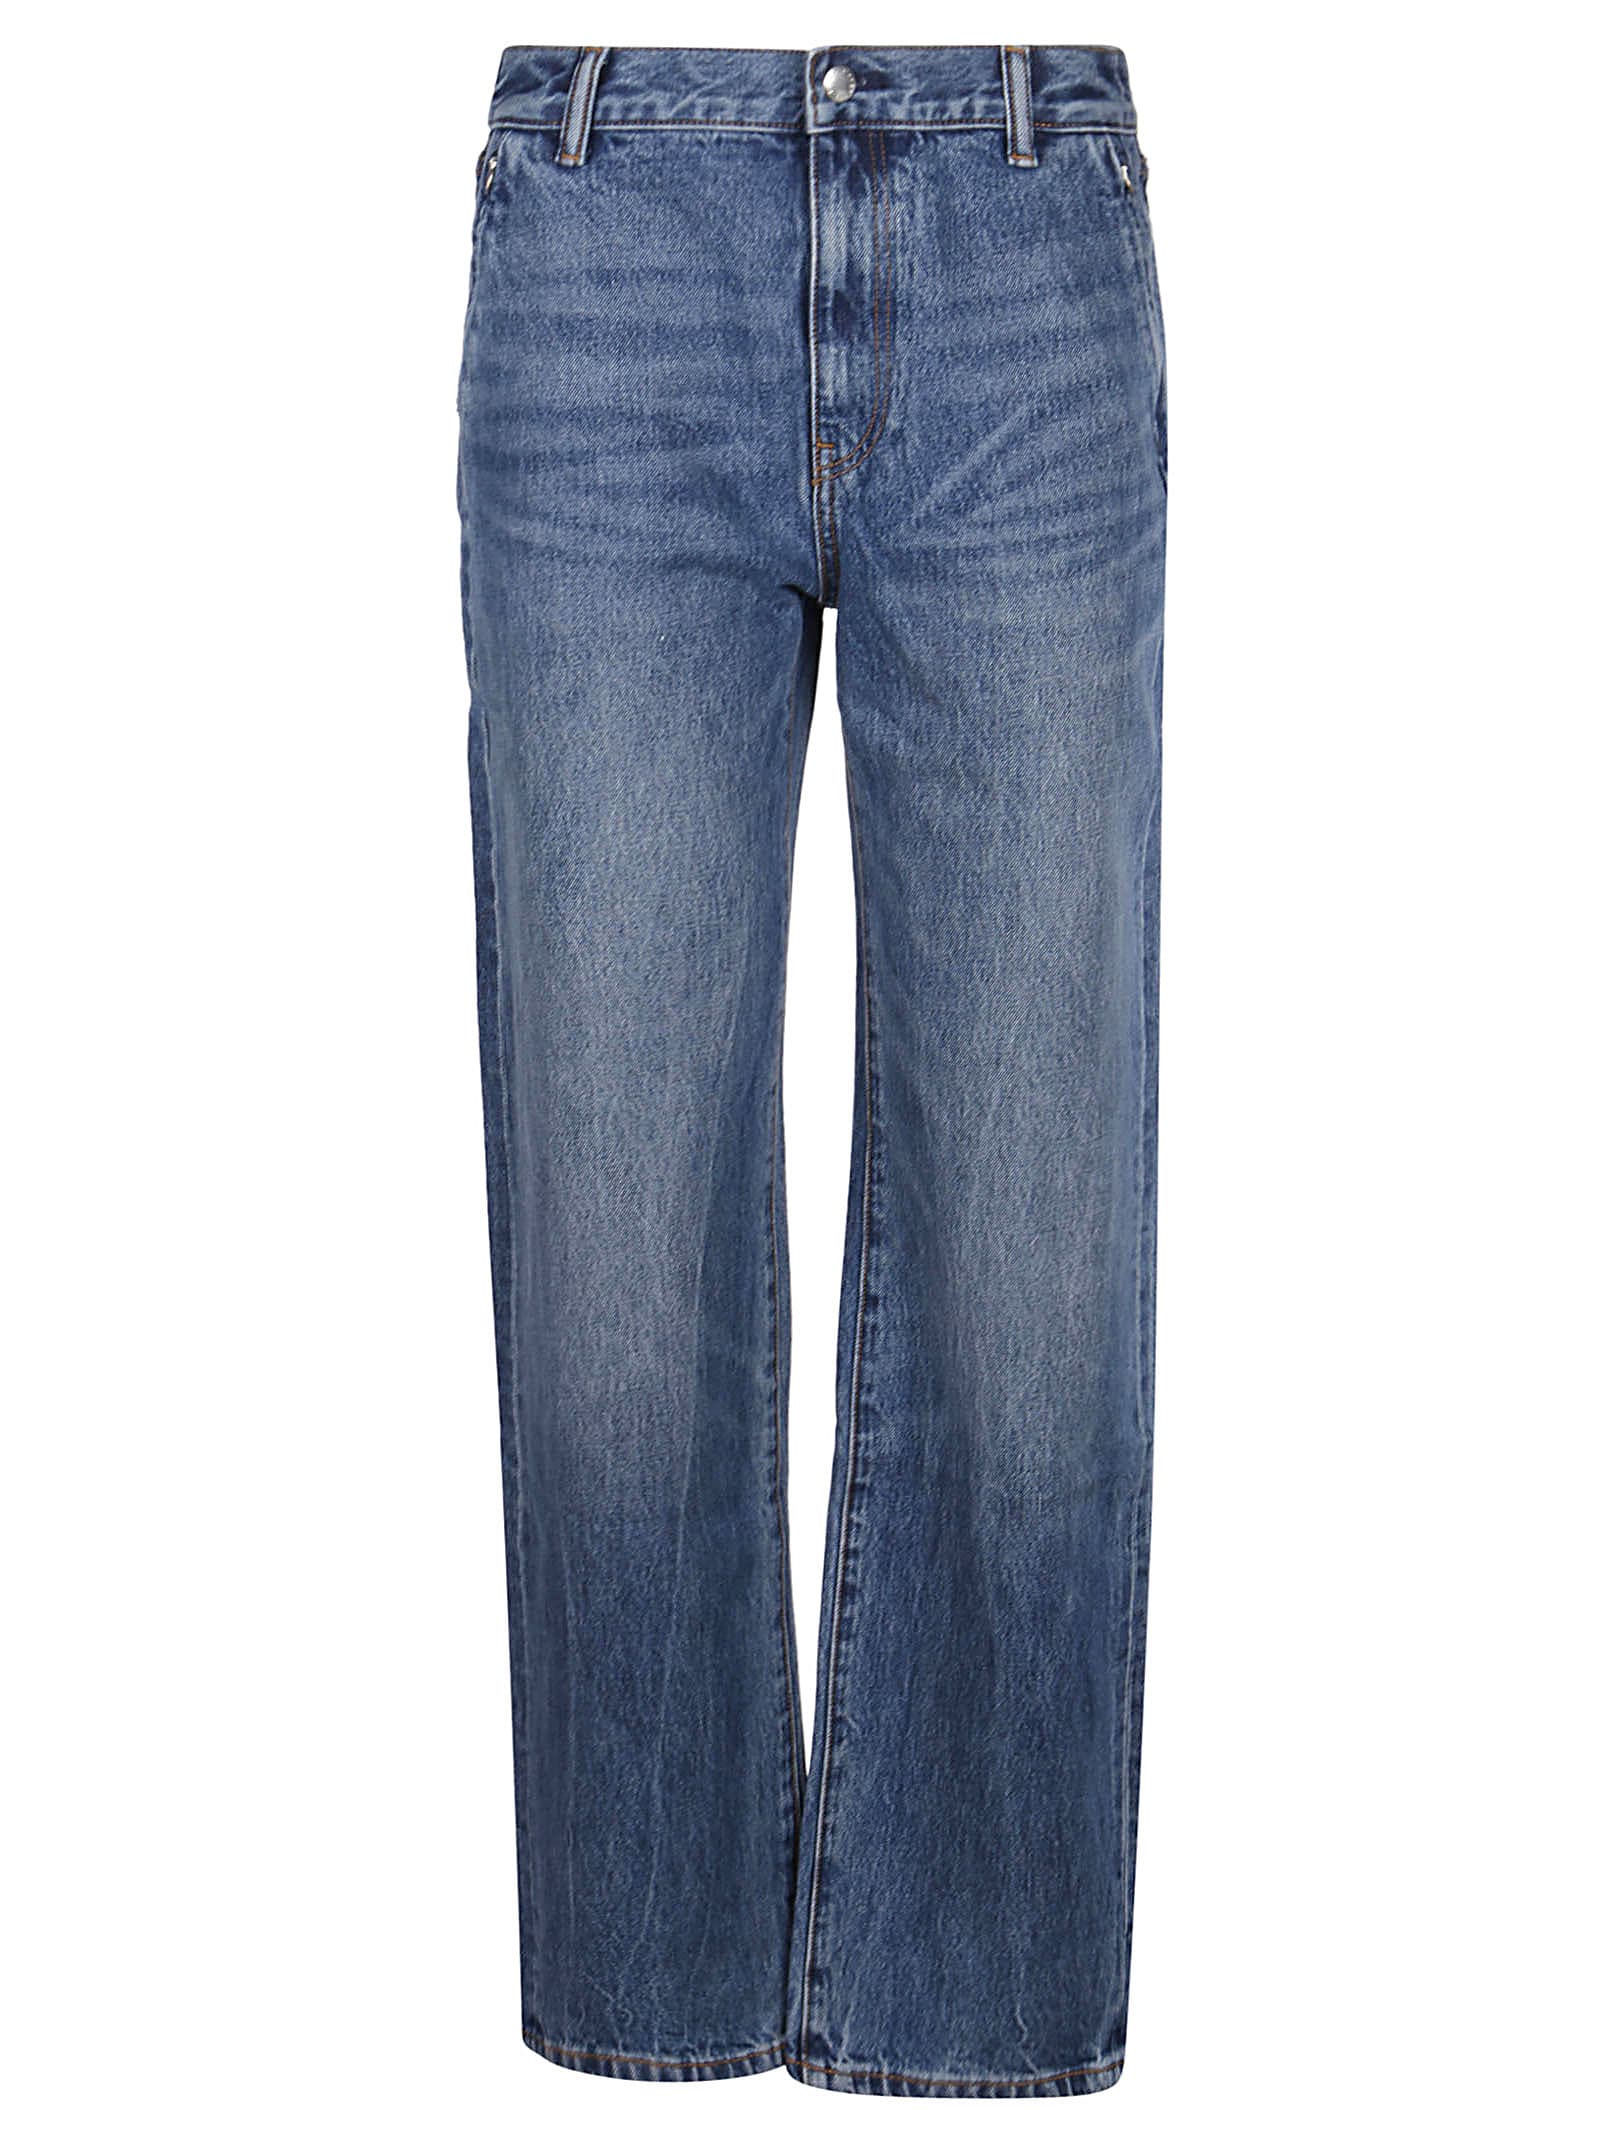 ALEXANDER WANG EZ MID RISE RELAXED STRAIGHT JEANS